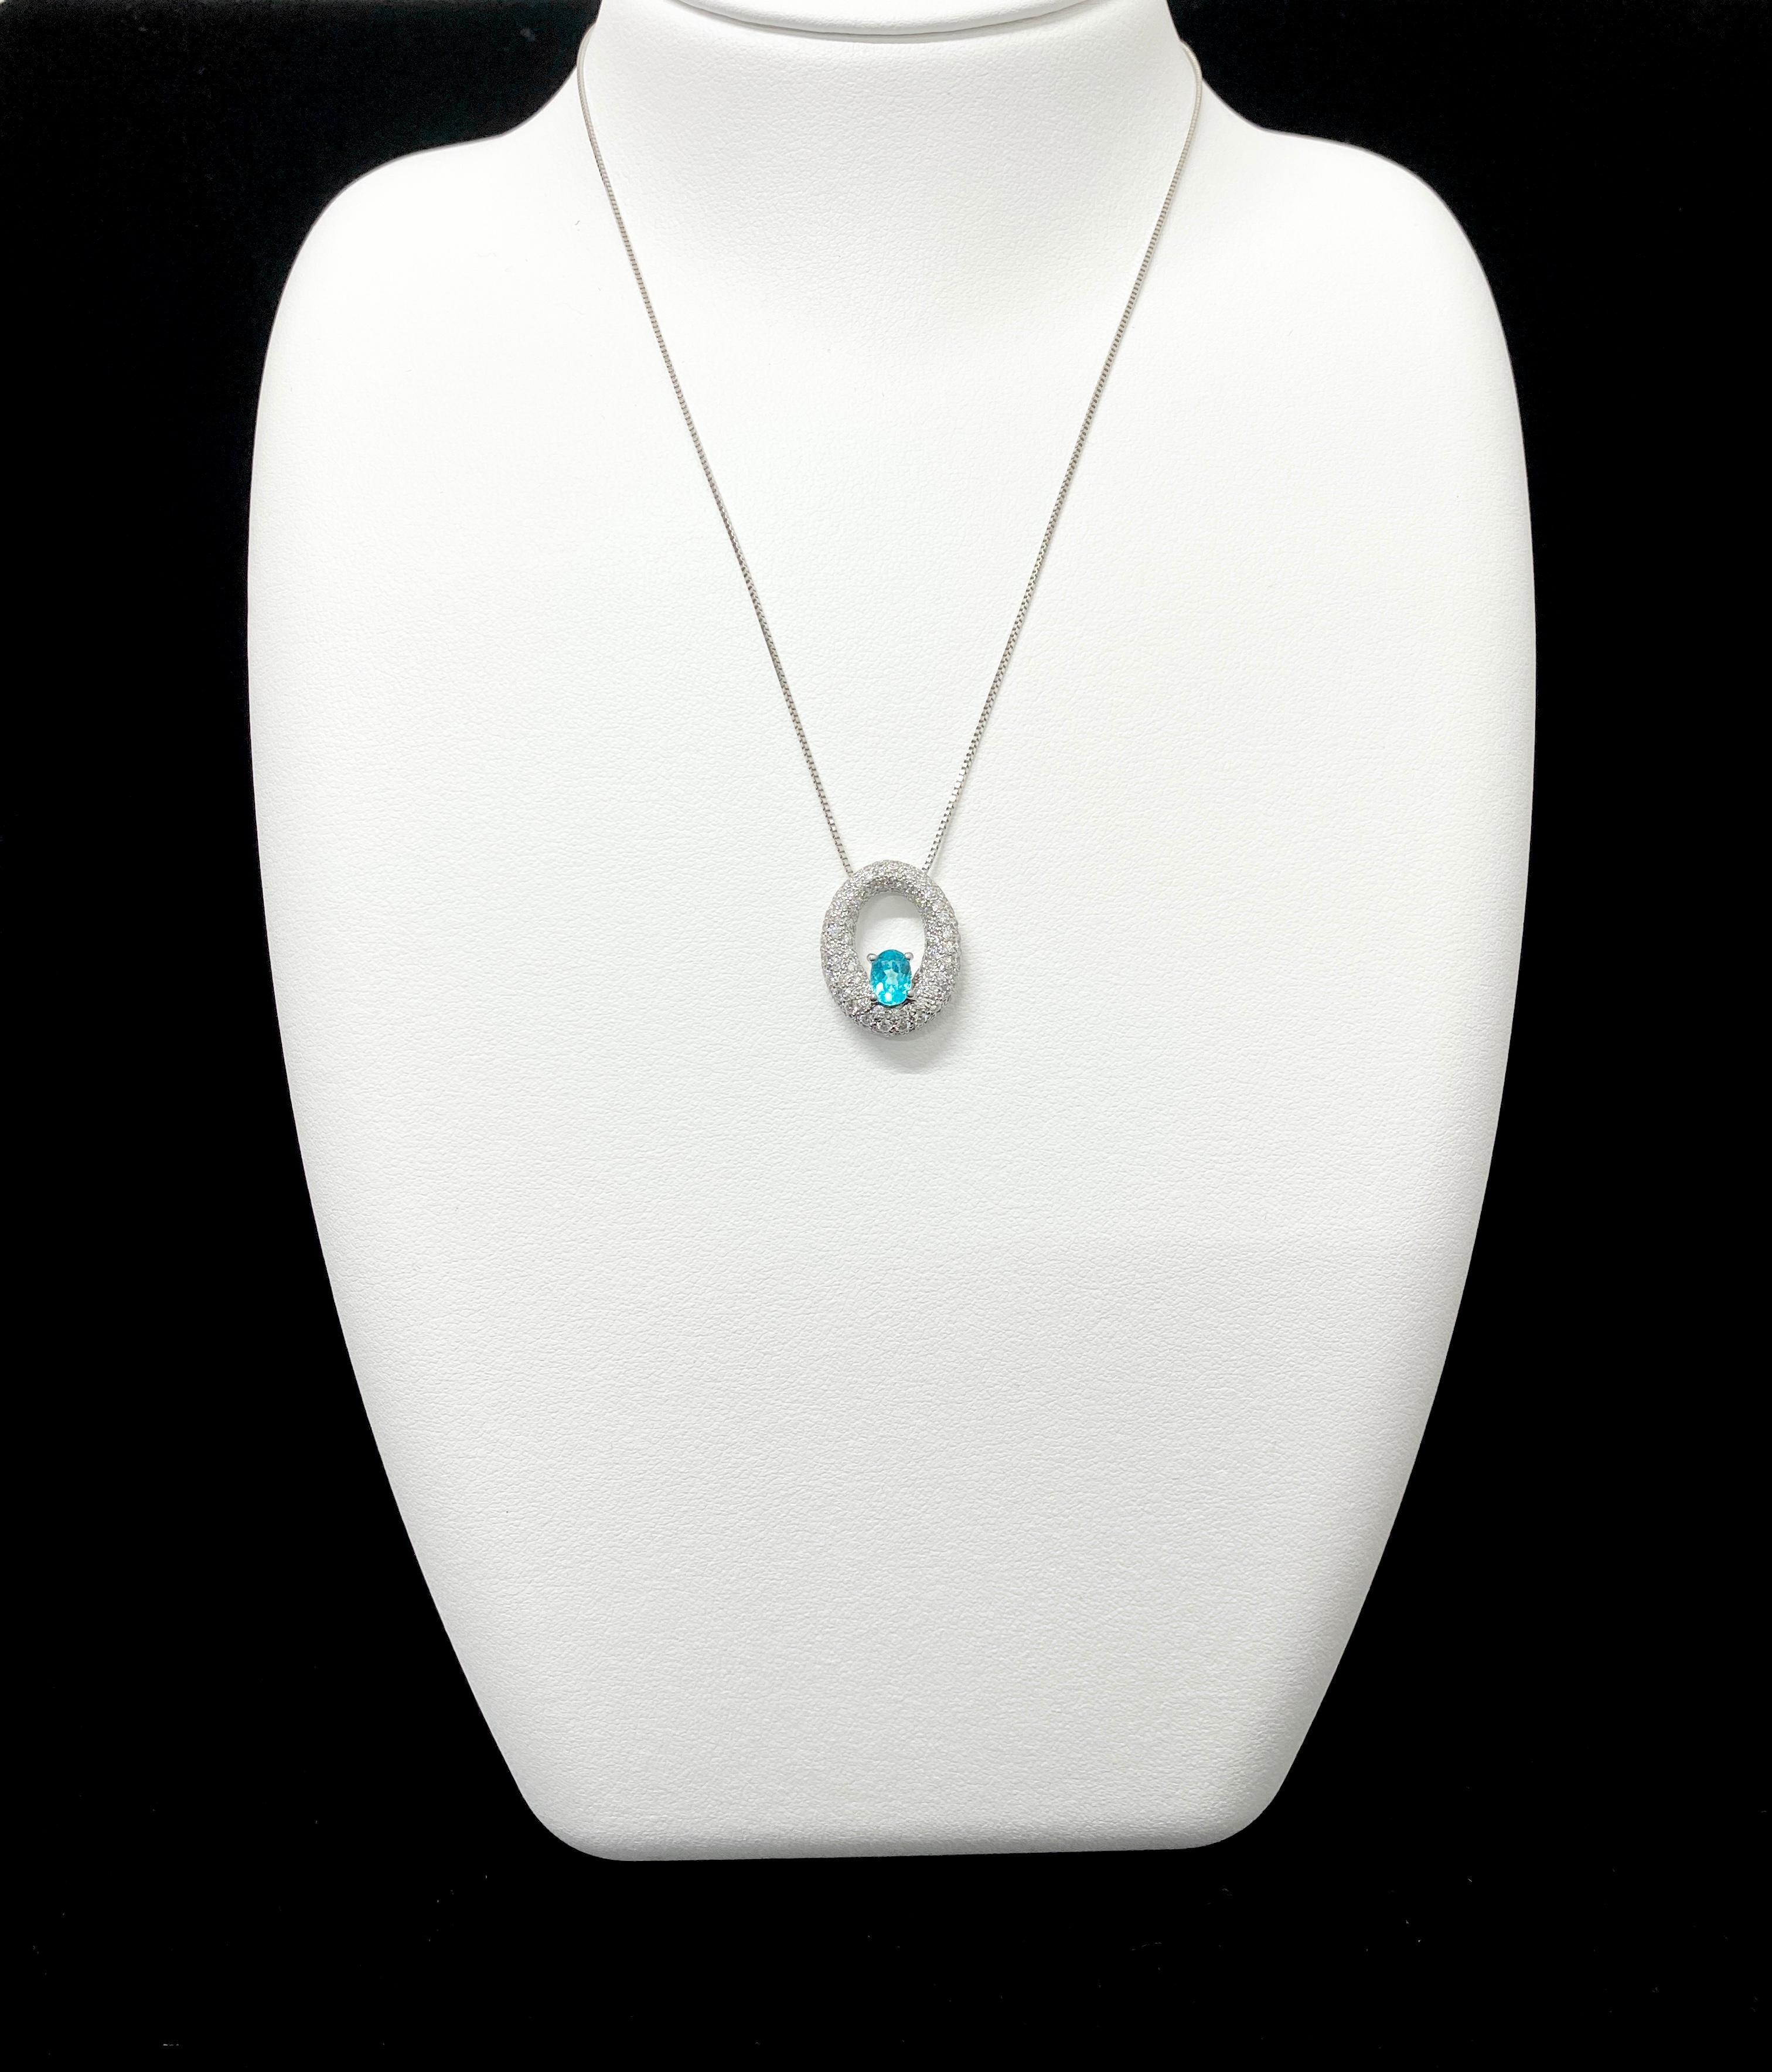 A stunning Pendant featuring a 0.47 Carat, Natural Paraiba Tourmaline and 1.03 Carats of Diamond Accents set in Platinum. Paraiba Tourmalines were only discovered 30 years ago in the Brazilian state of the same name- Paraiba. Since then they have